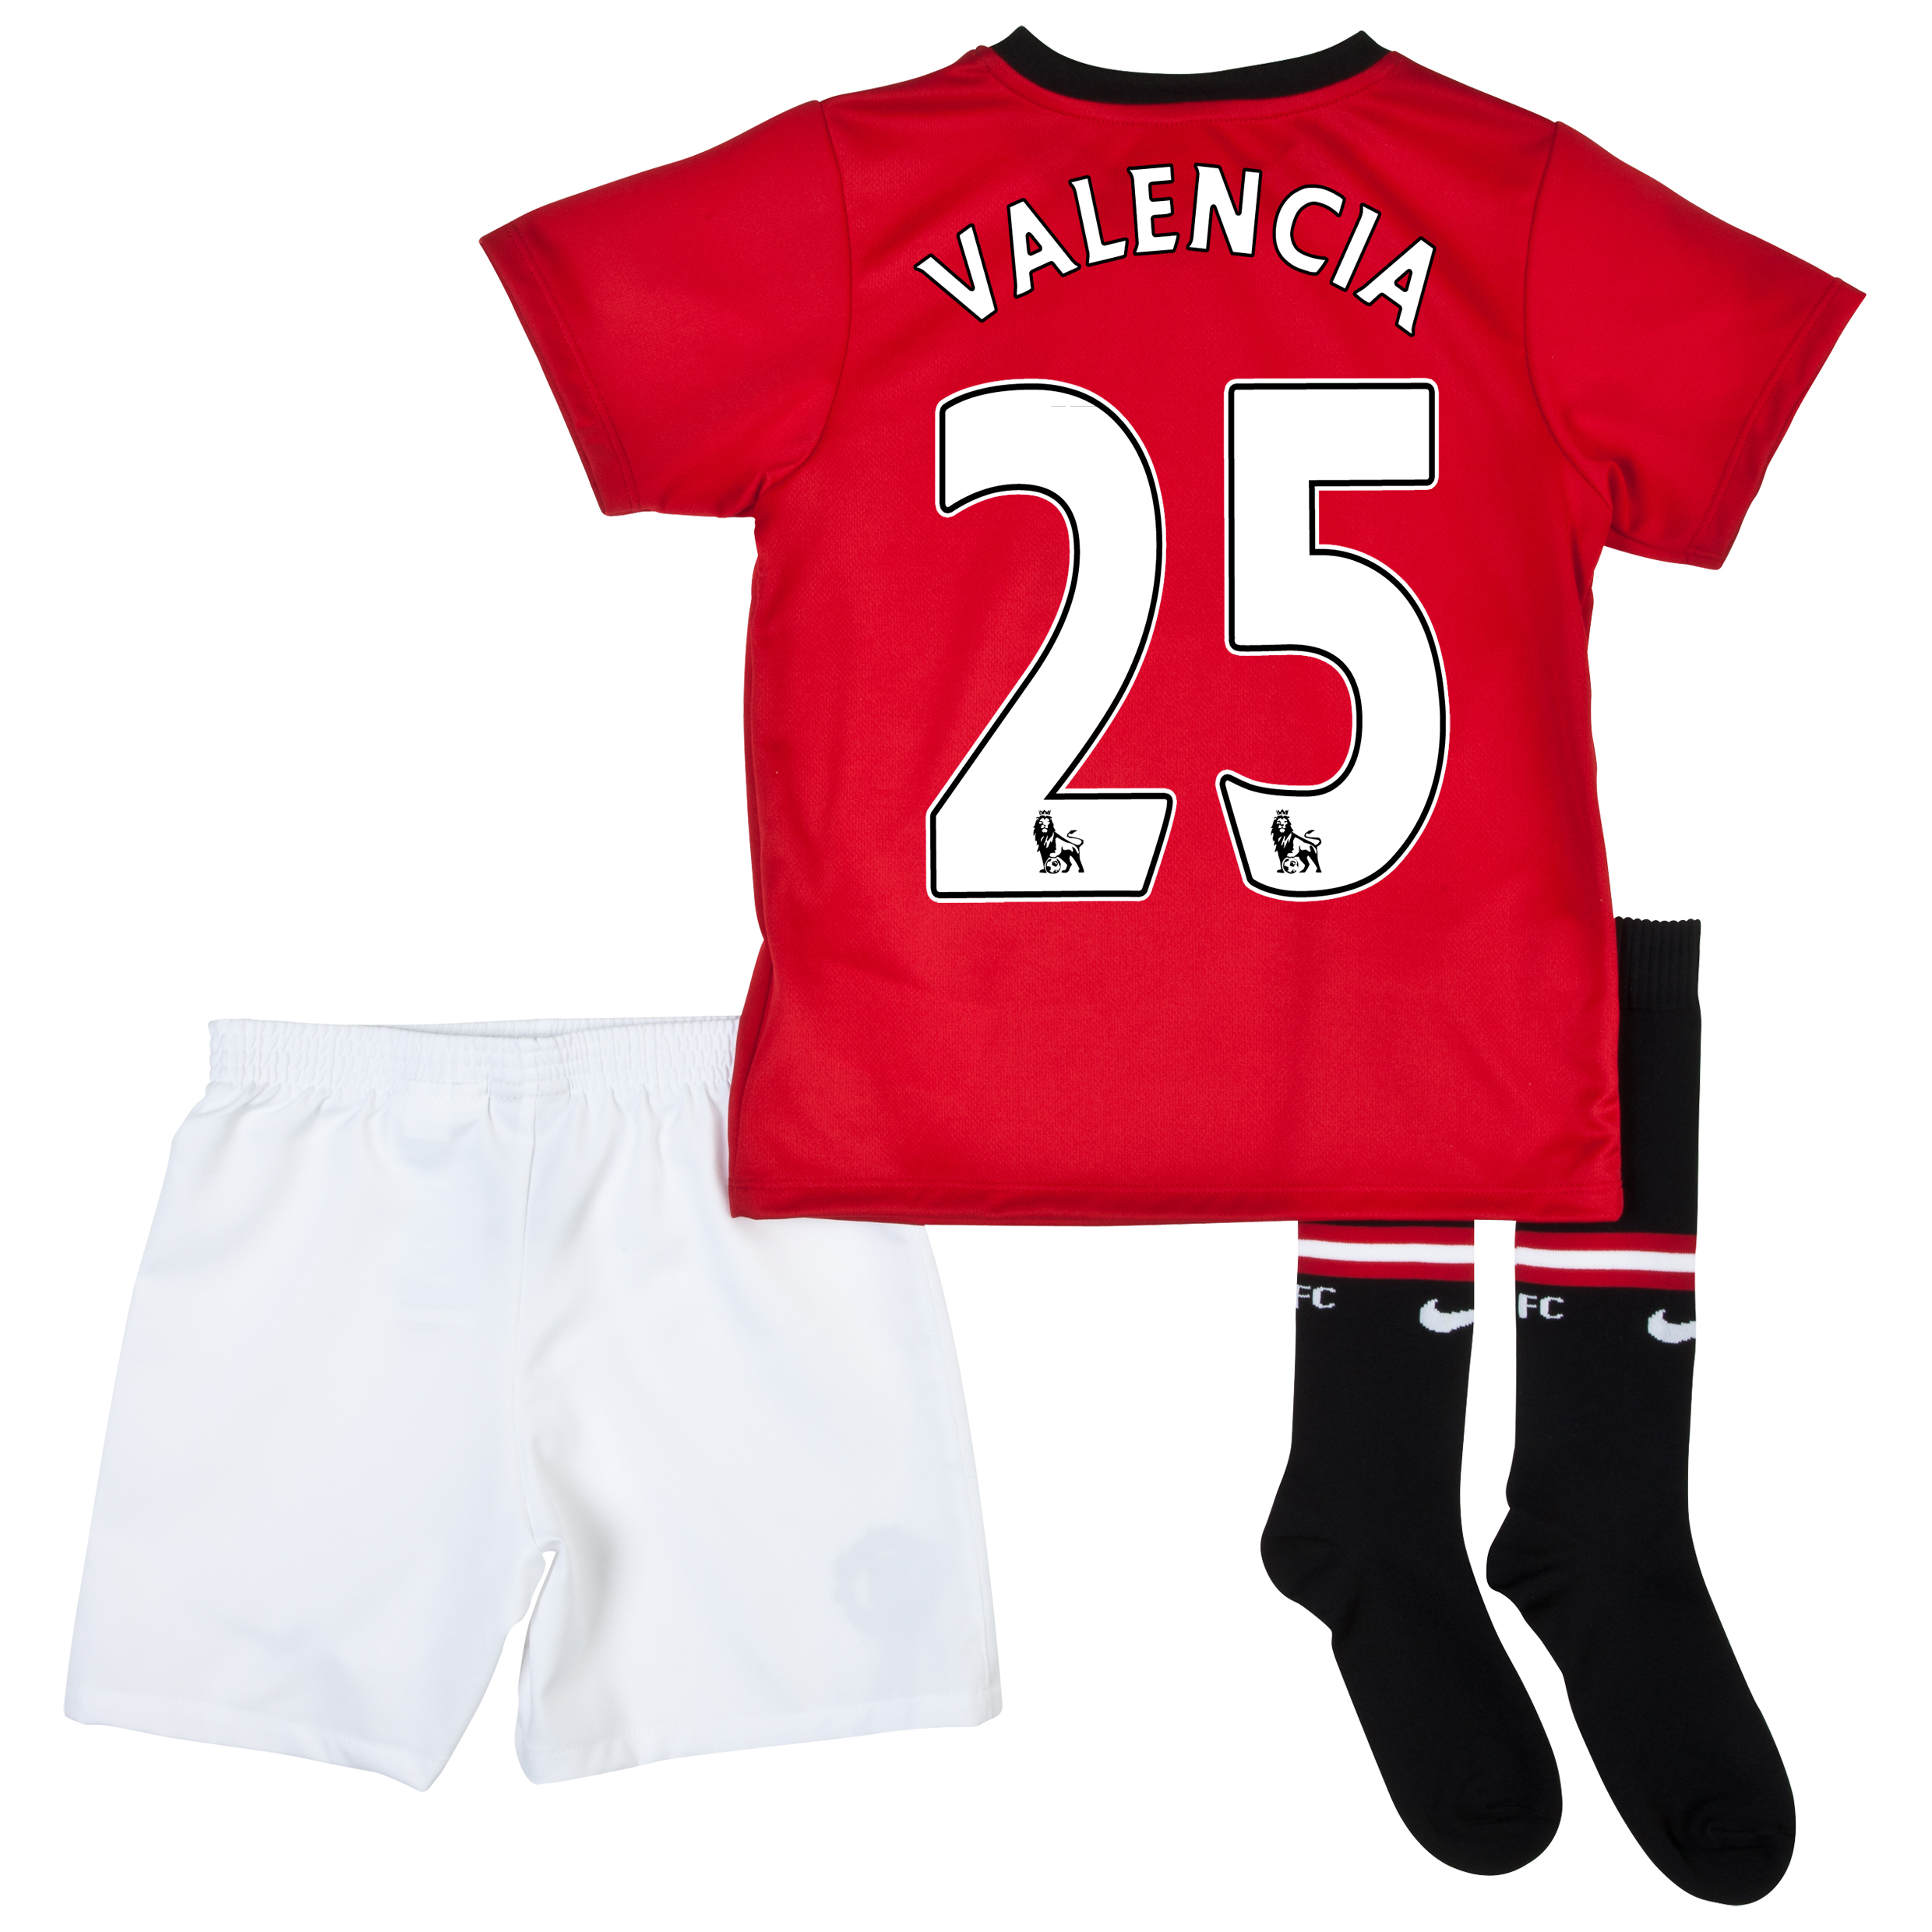 Manchester United Home Kit 2013/14 - Little Boys with Valencia 25 printing